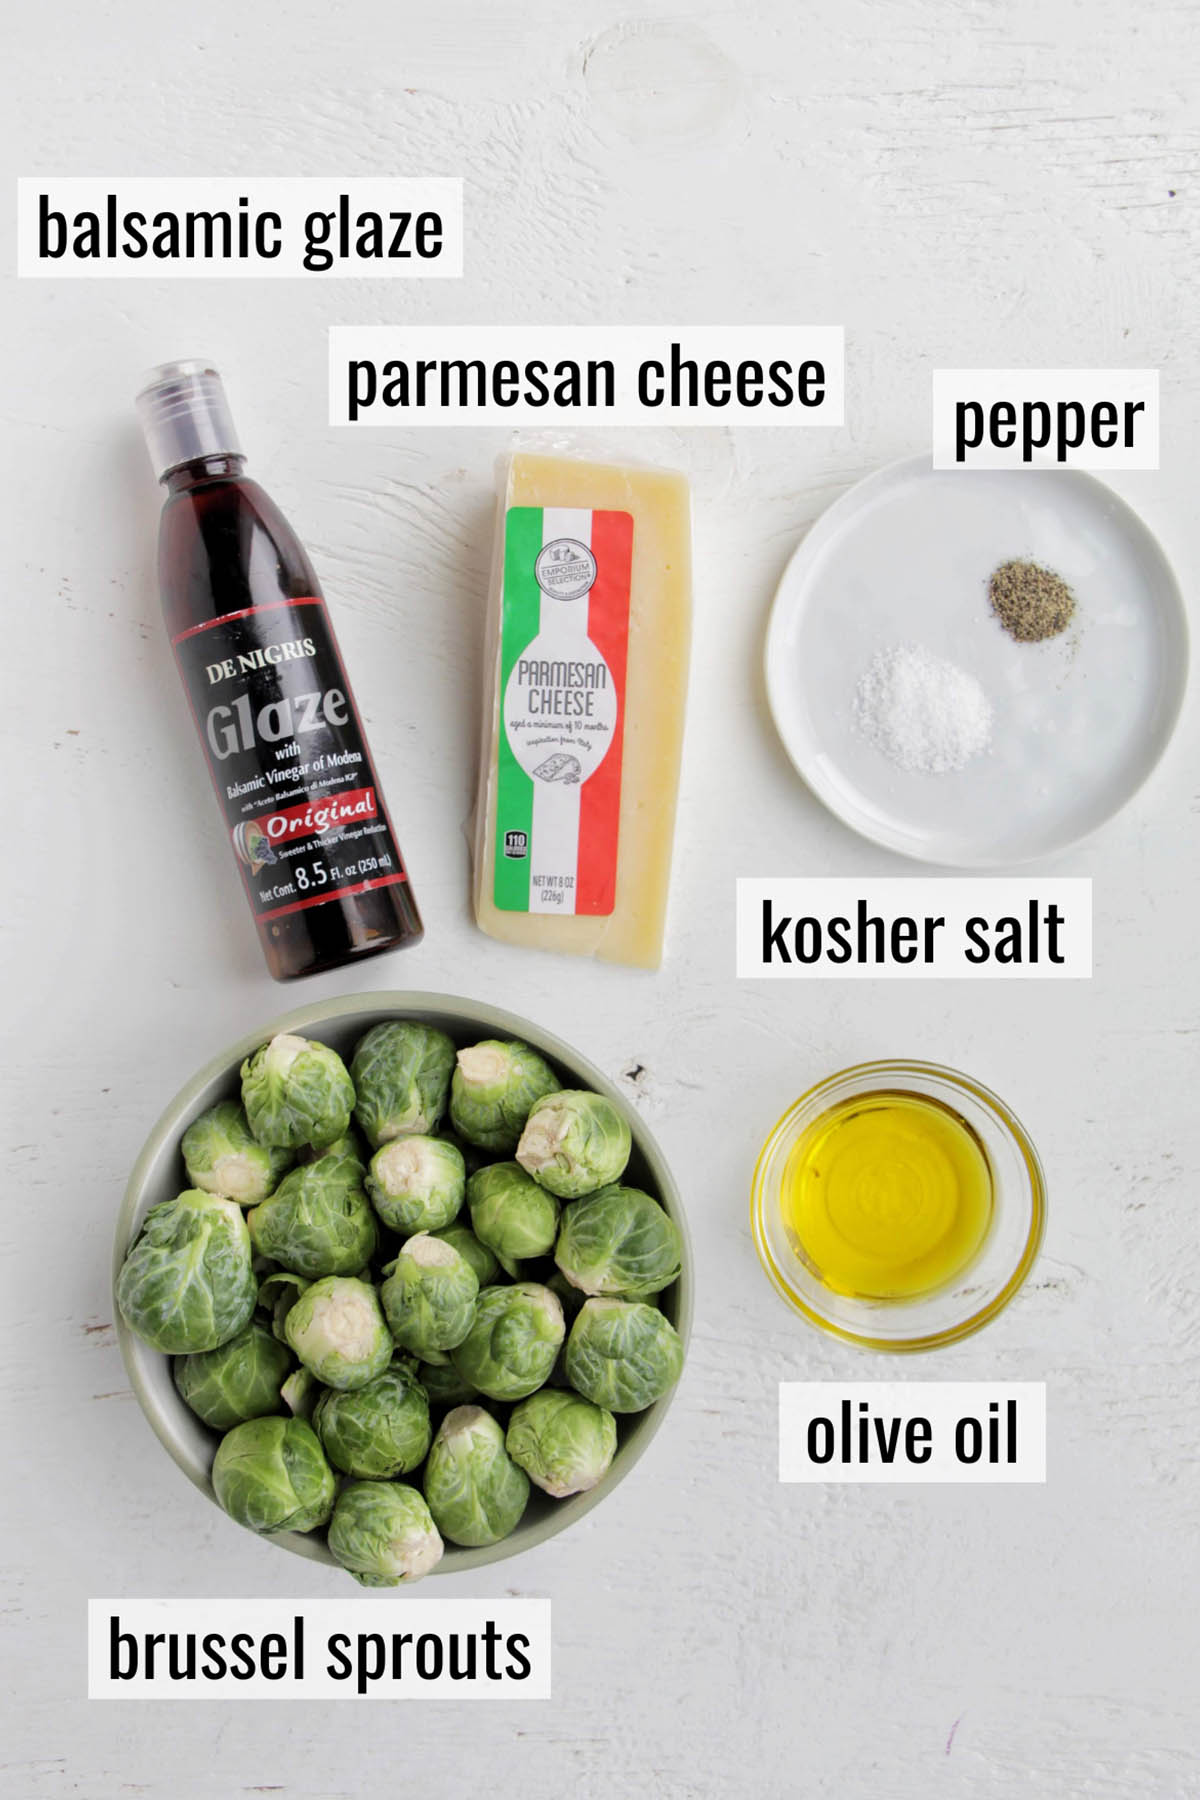 balsamic glazed oven roasted brussel sprout ingredients with labels.